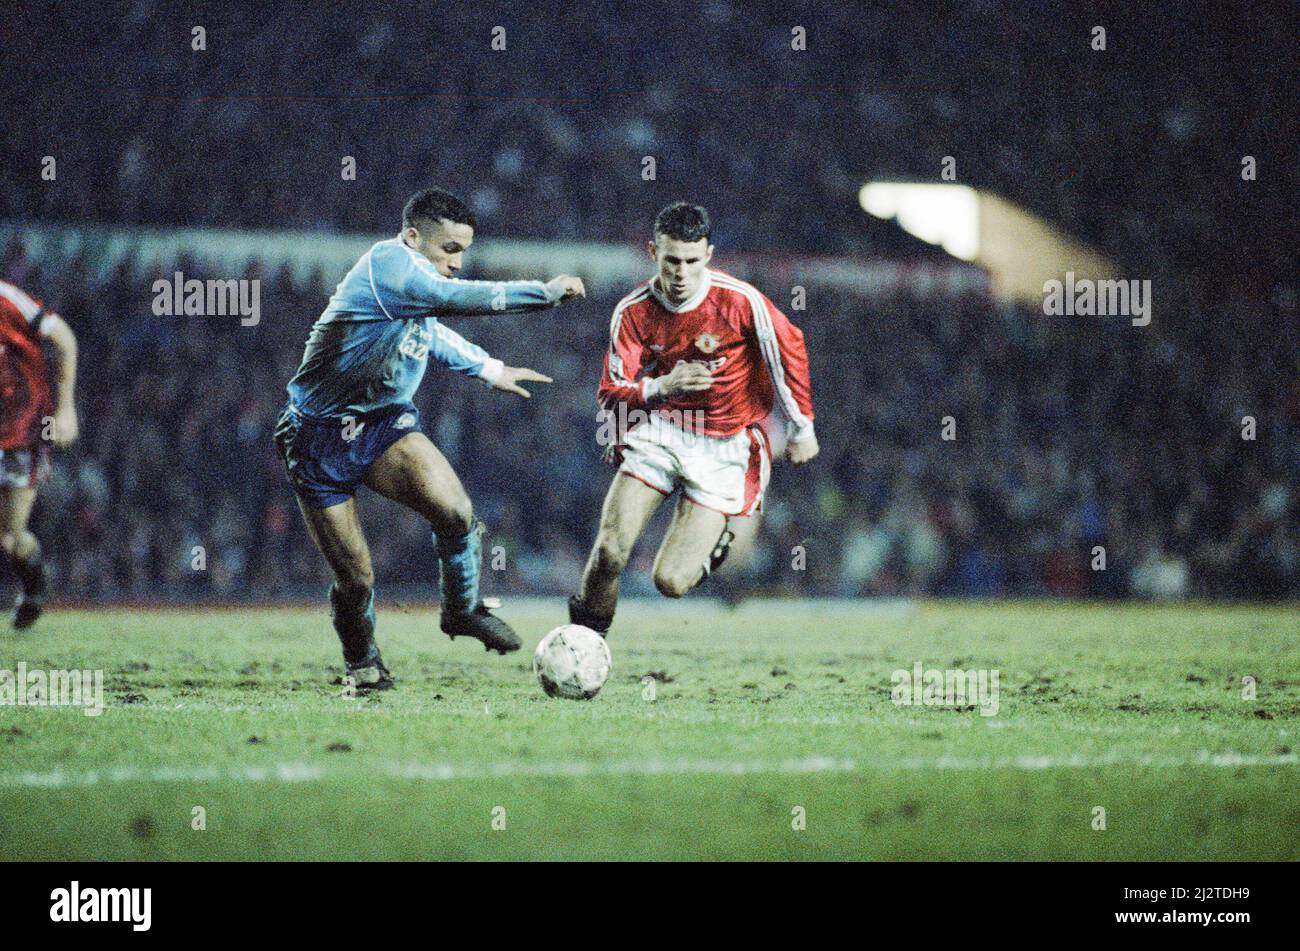 Man United 2-1 Middlesbrough, League Cup match at Old Trafford, Wednesday 11th March 1992. Ryan Giggs Stock Photo